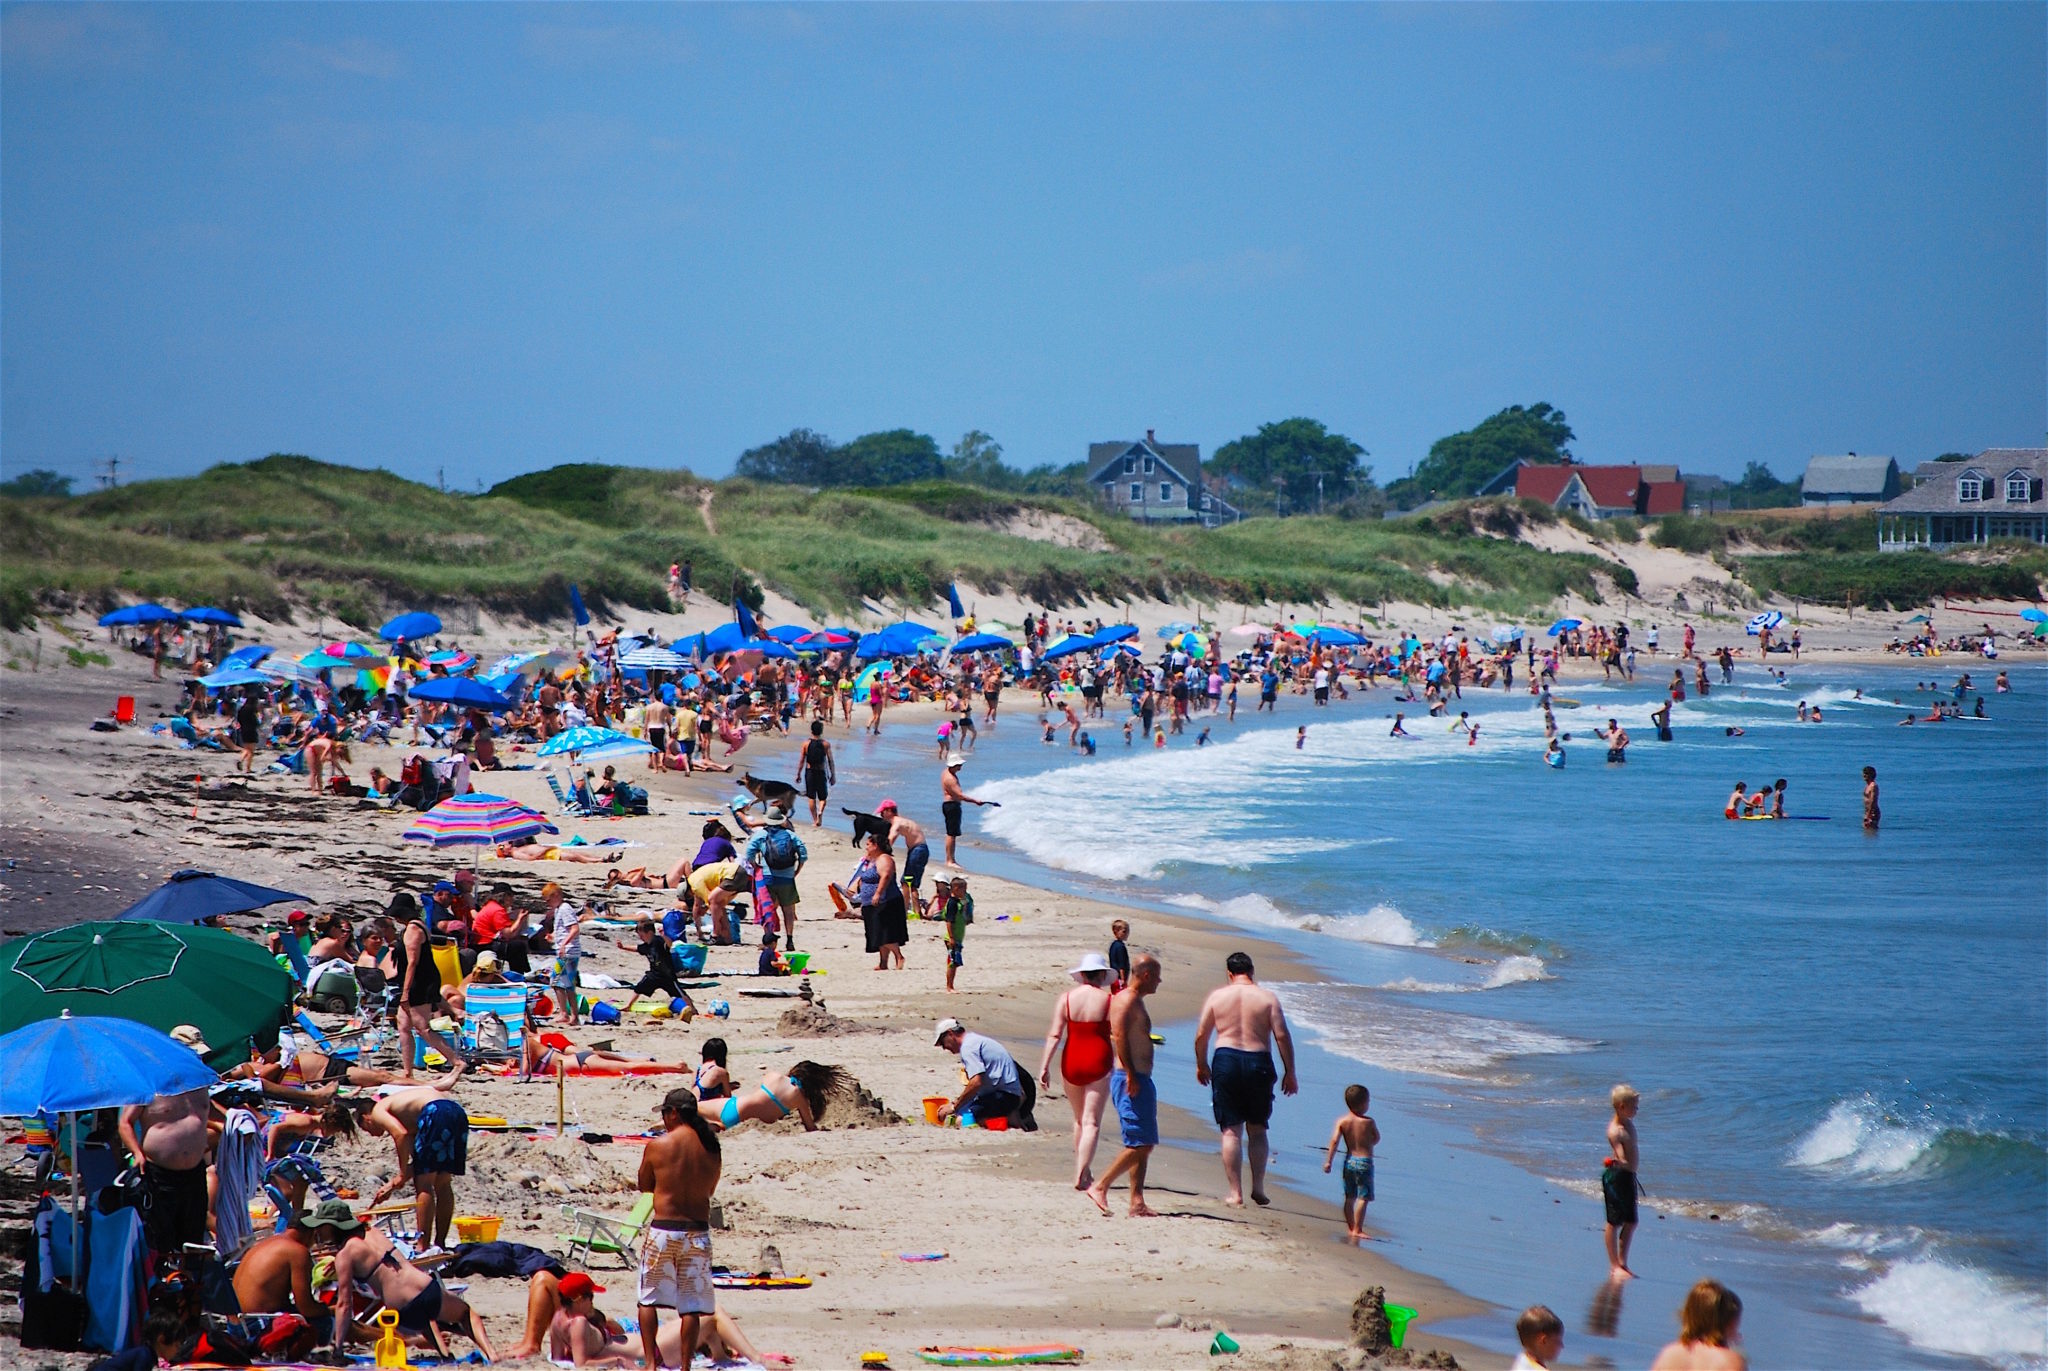 BEACH TIME! Summer and Rhode Islanders head to the beach. In this case, it's Block Island, but there are many opportunities to take in sun and surf in the Ocean State. / PBN PHOTO/K. CURTIS